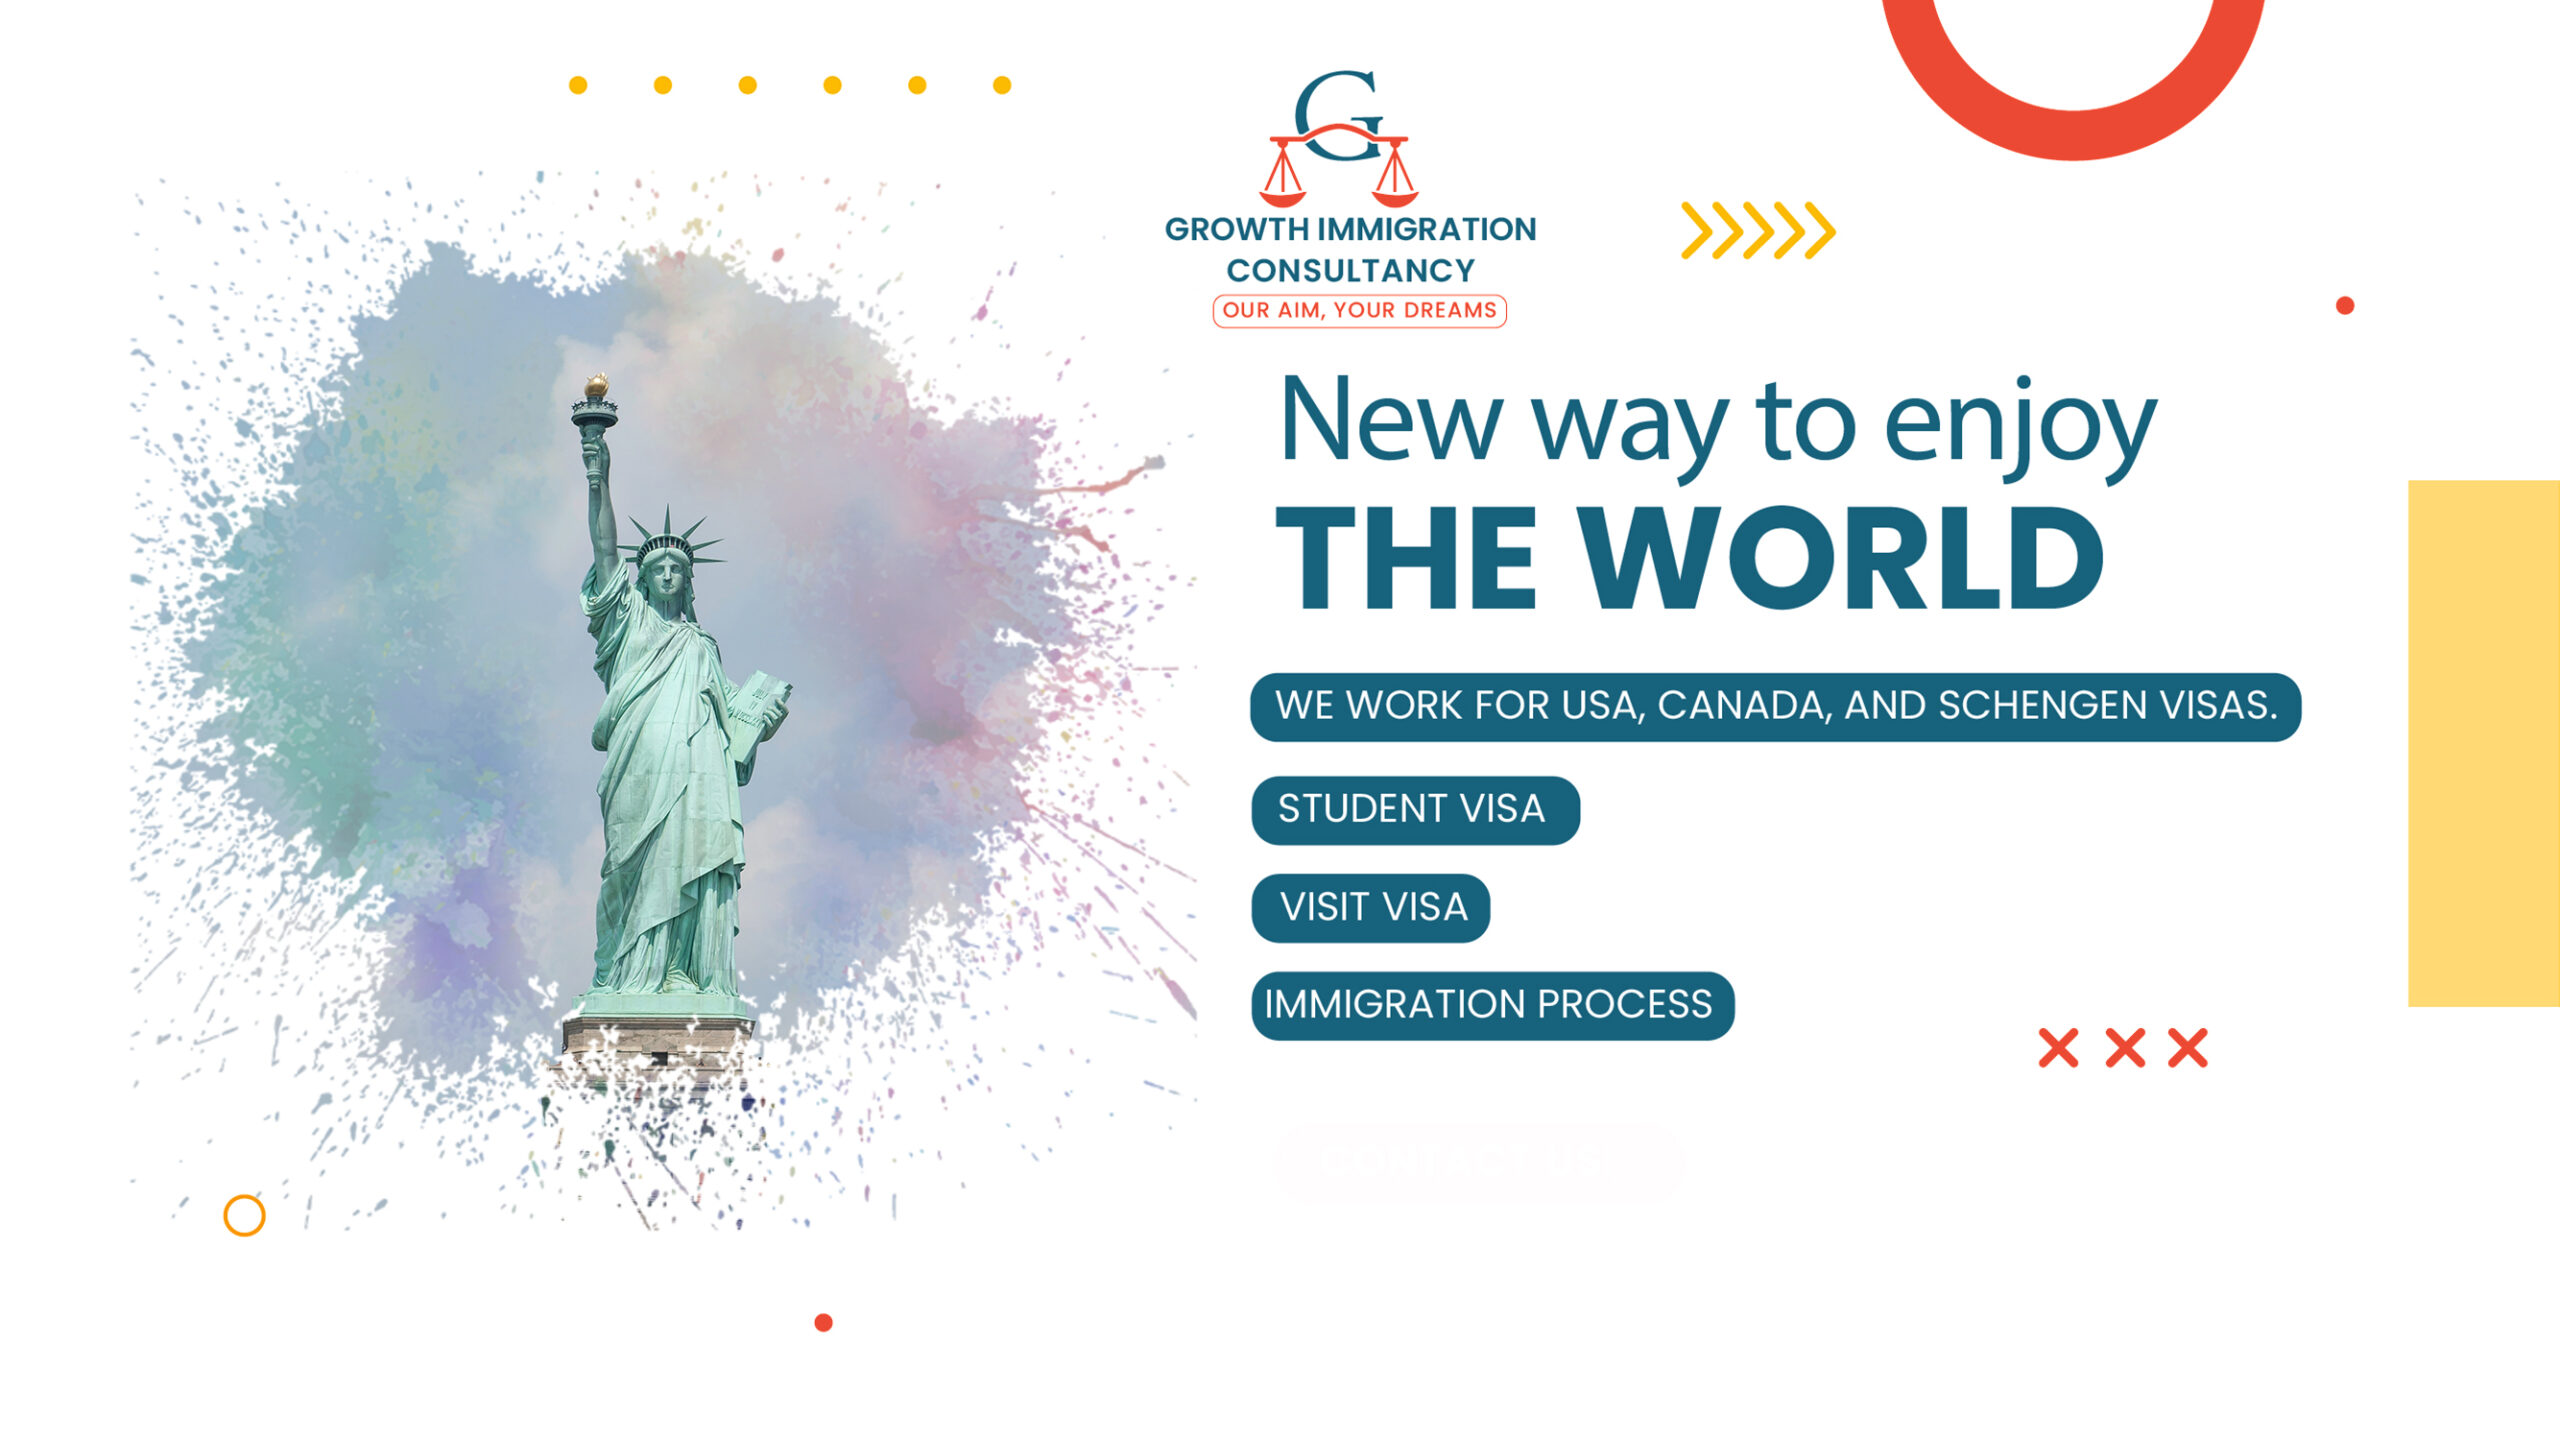 grwoth law immigration consultancy